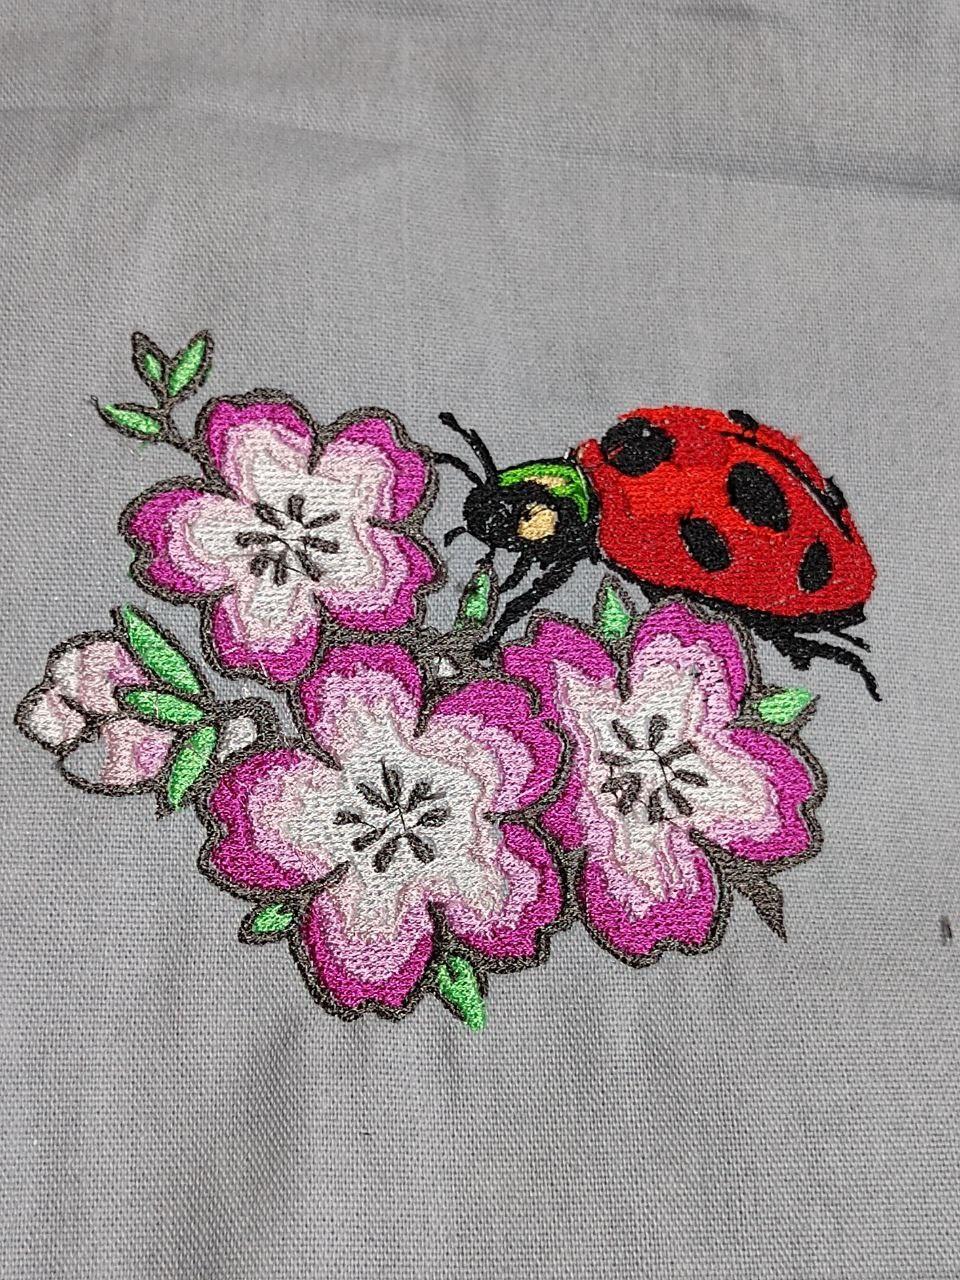 Apple flowers with ladybug free embroidery design